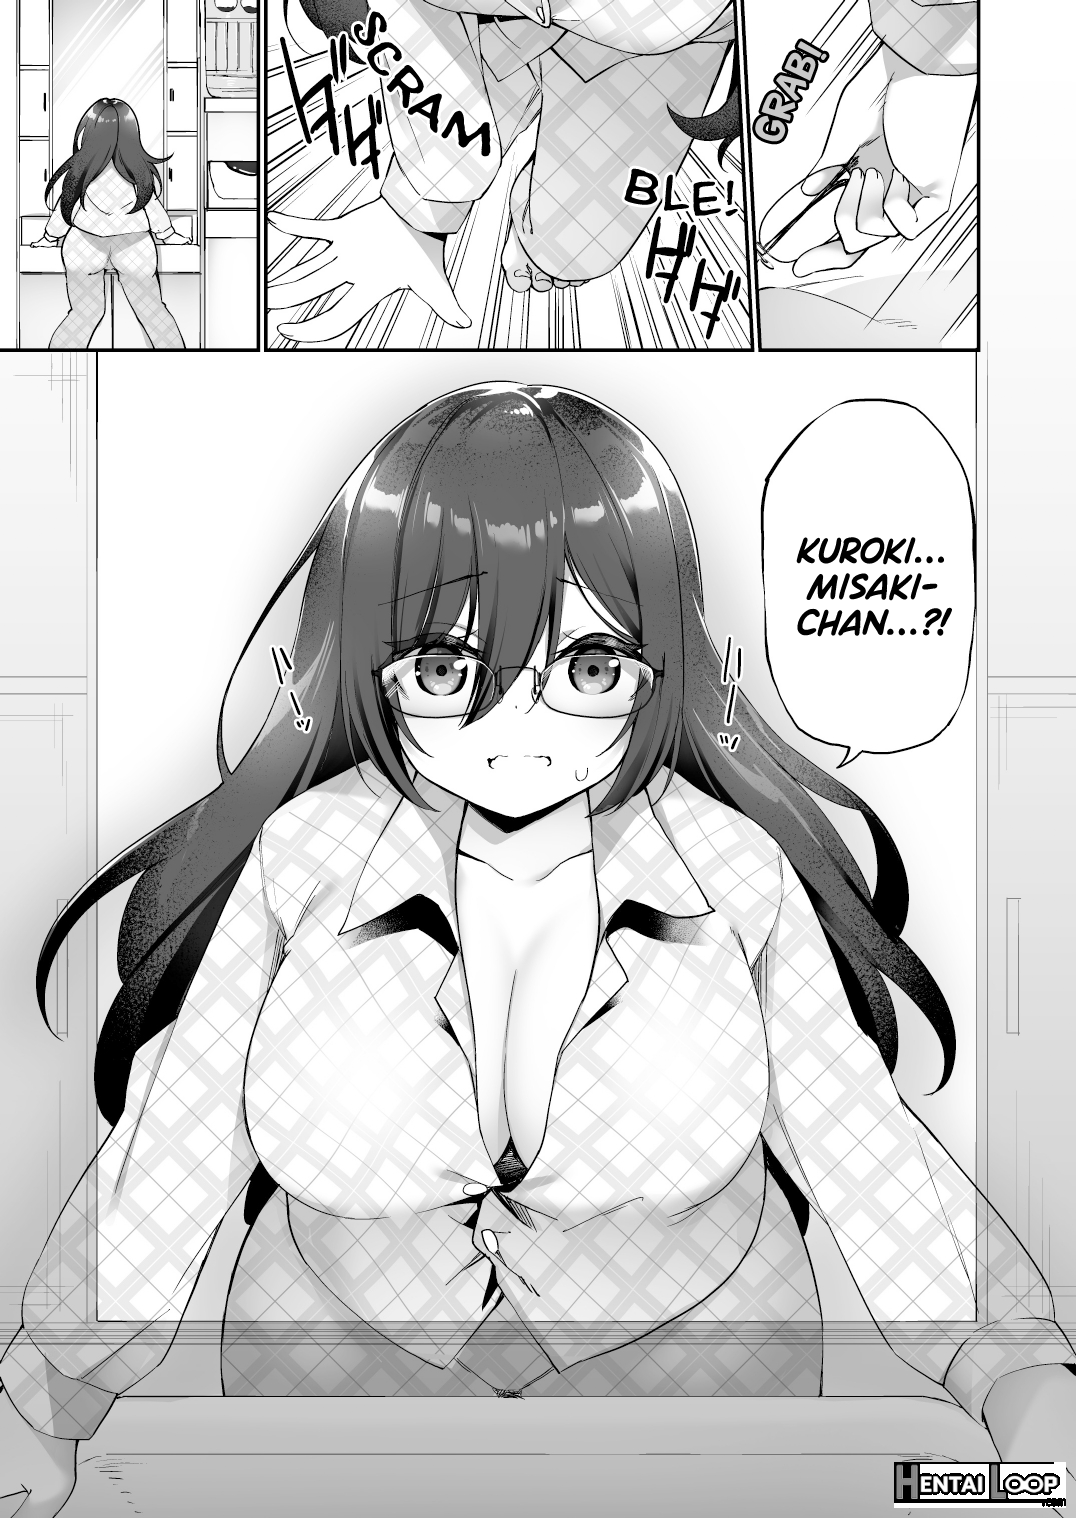 My Voluptuous Yandere Kouhai Who Gets Turned On Just By Hearing My Voice Switched Bodies With Me! page 4